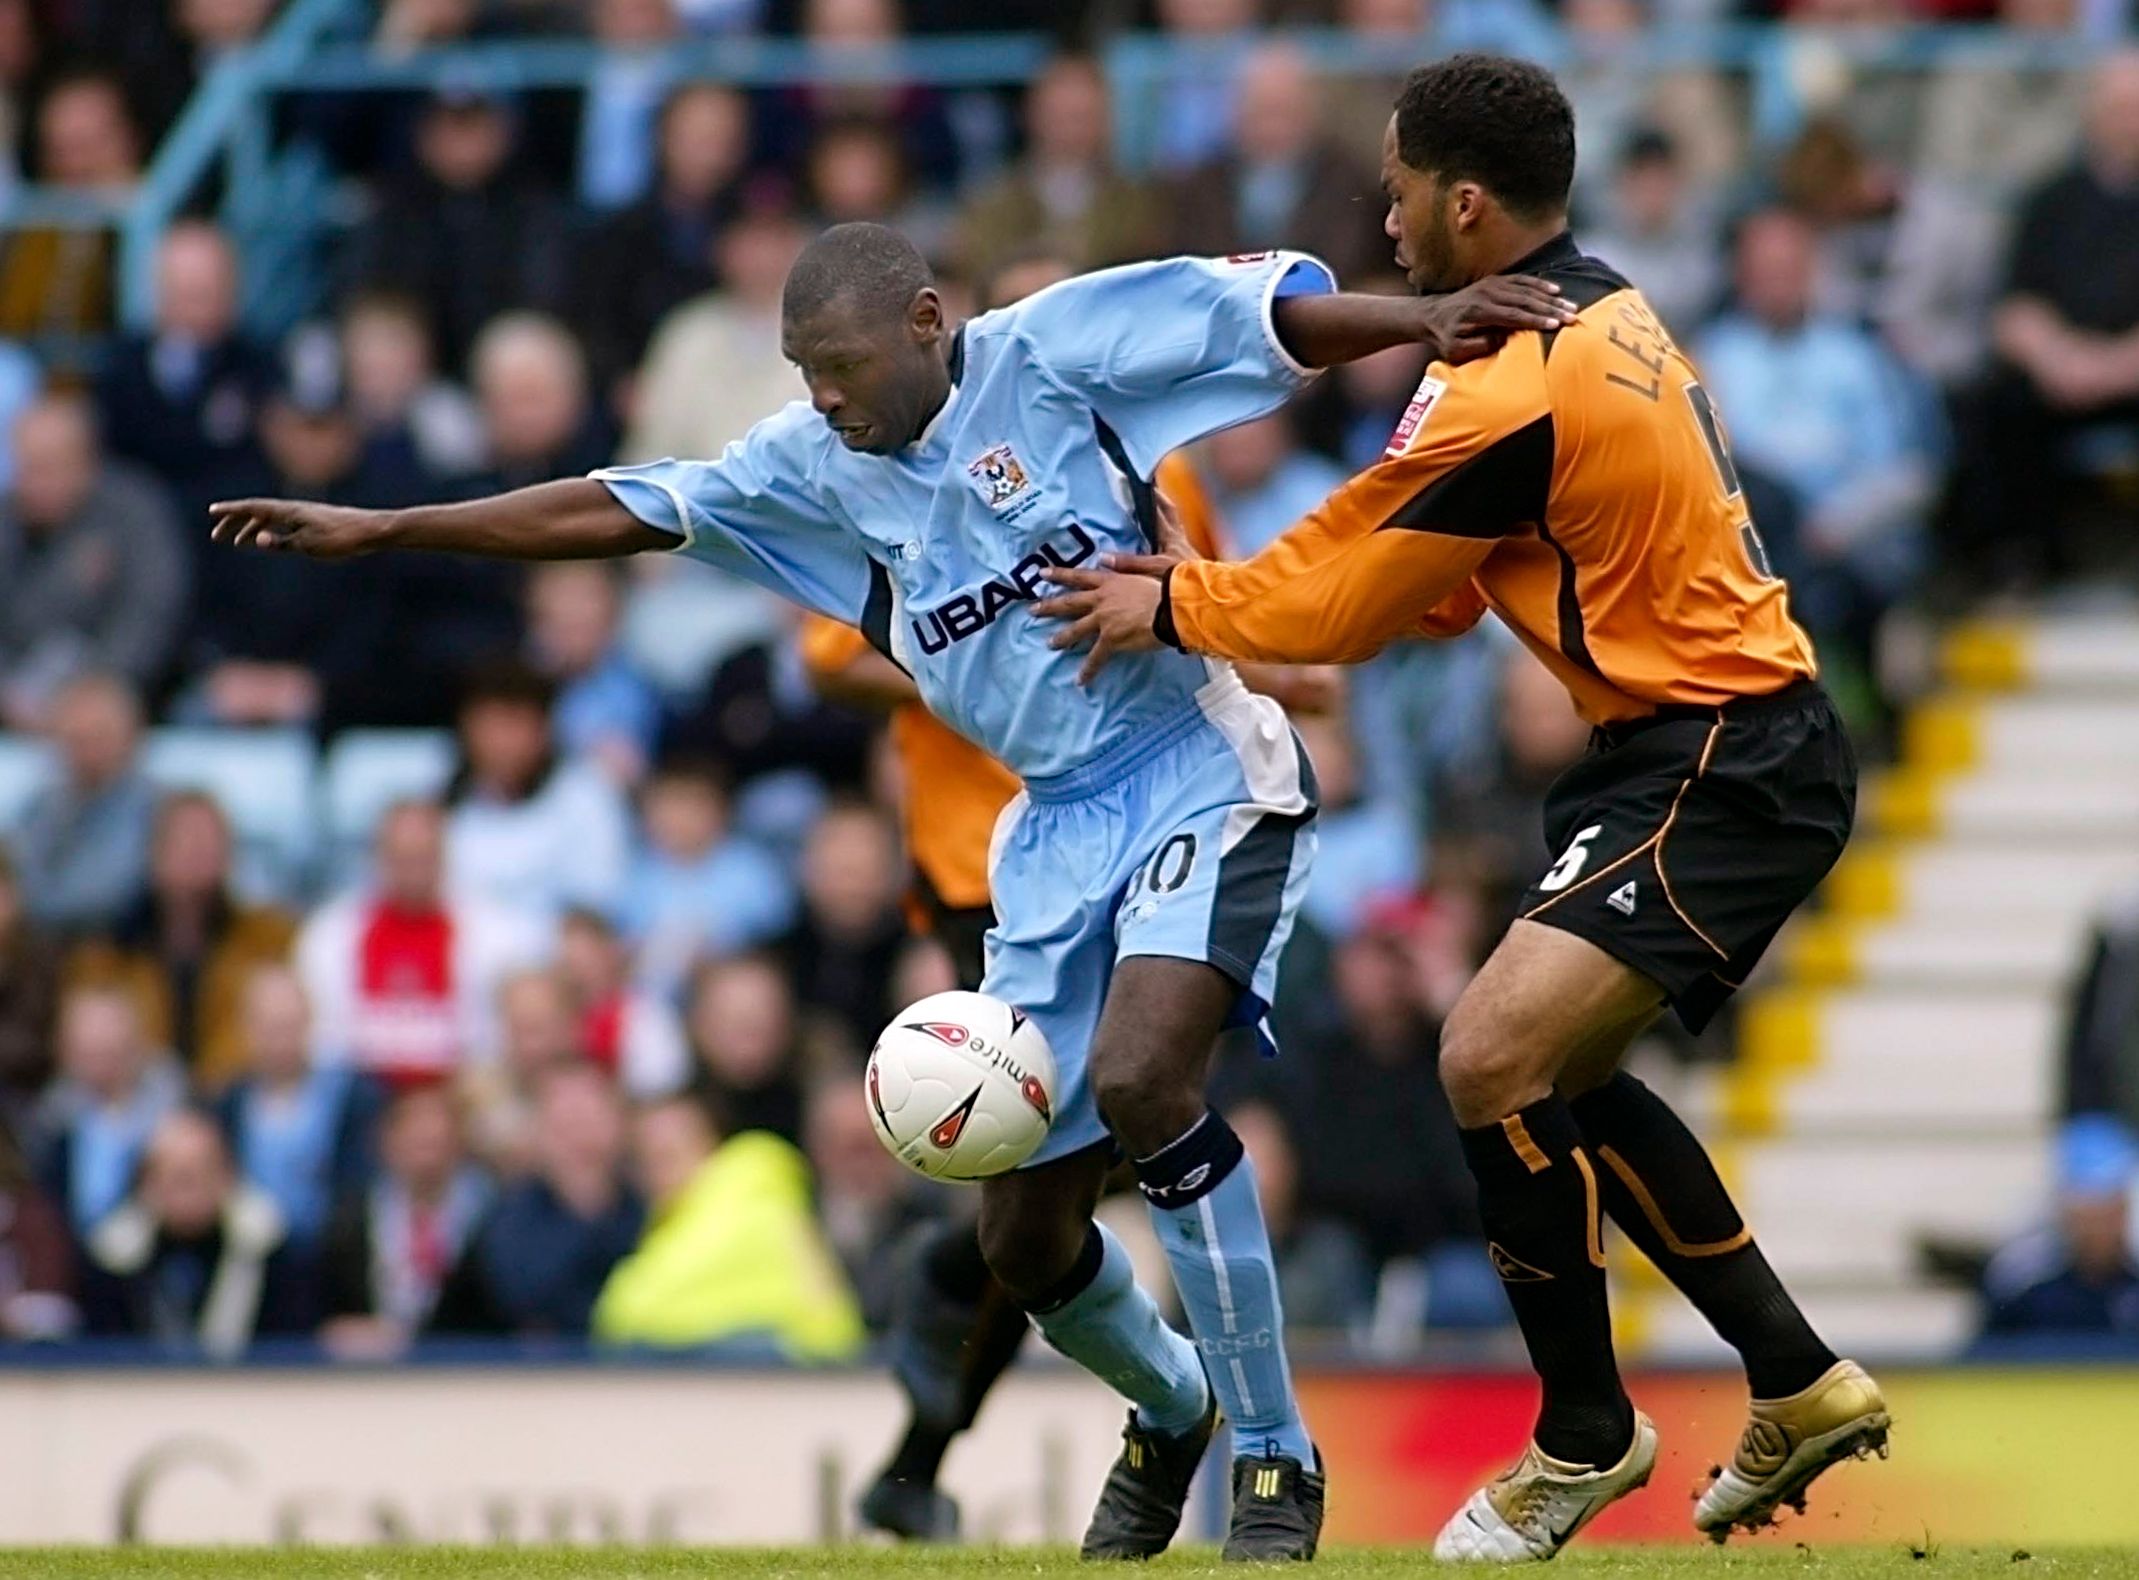 Football - Coventry City v Wolverhampton Wanderers Coca-Cola Football League Championship  - Highfield Road - 16/4/05 
Coventry's Shaun Goater holds Wolves' Joleon Lescott 
Mandatory Credit: Action Images / Ian Smith